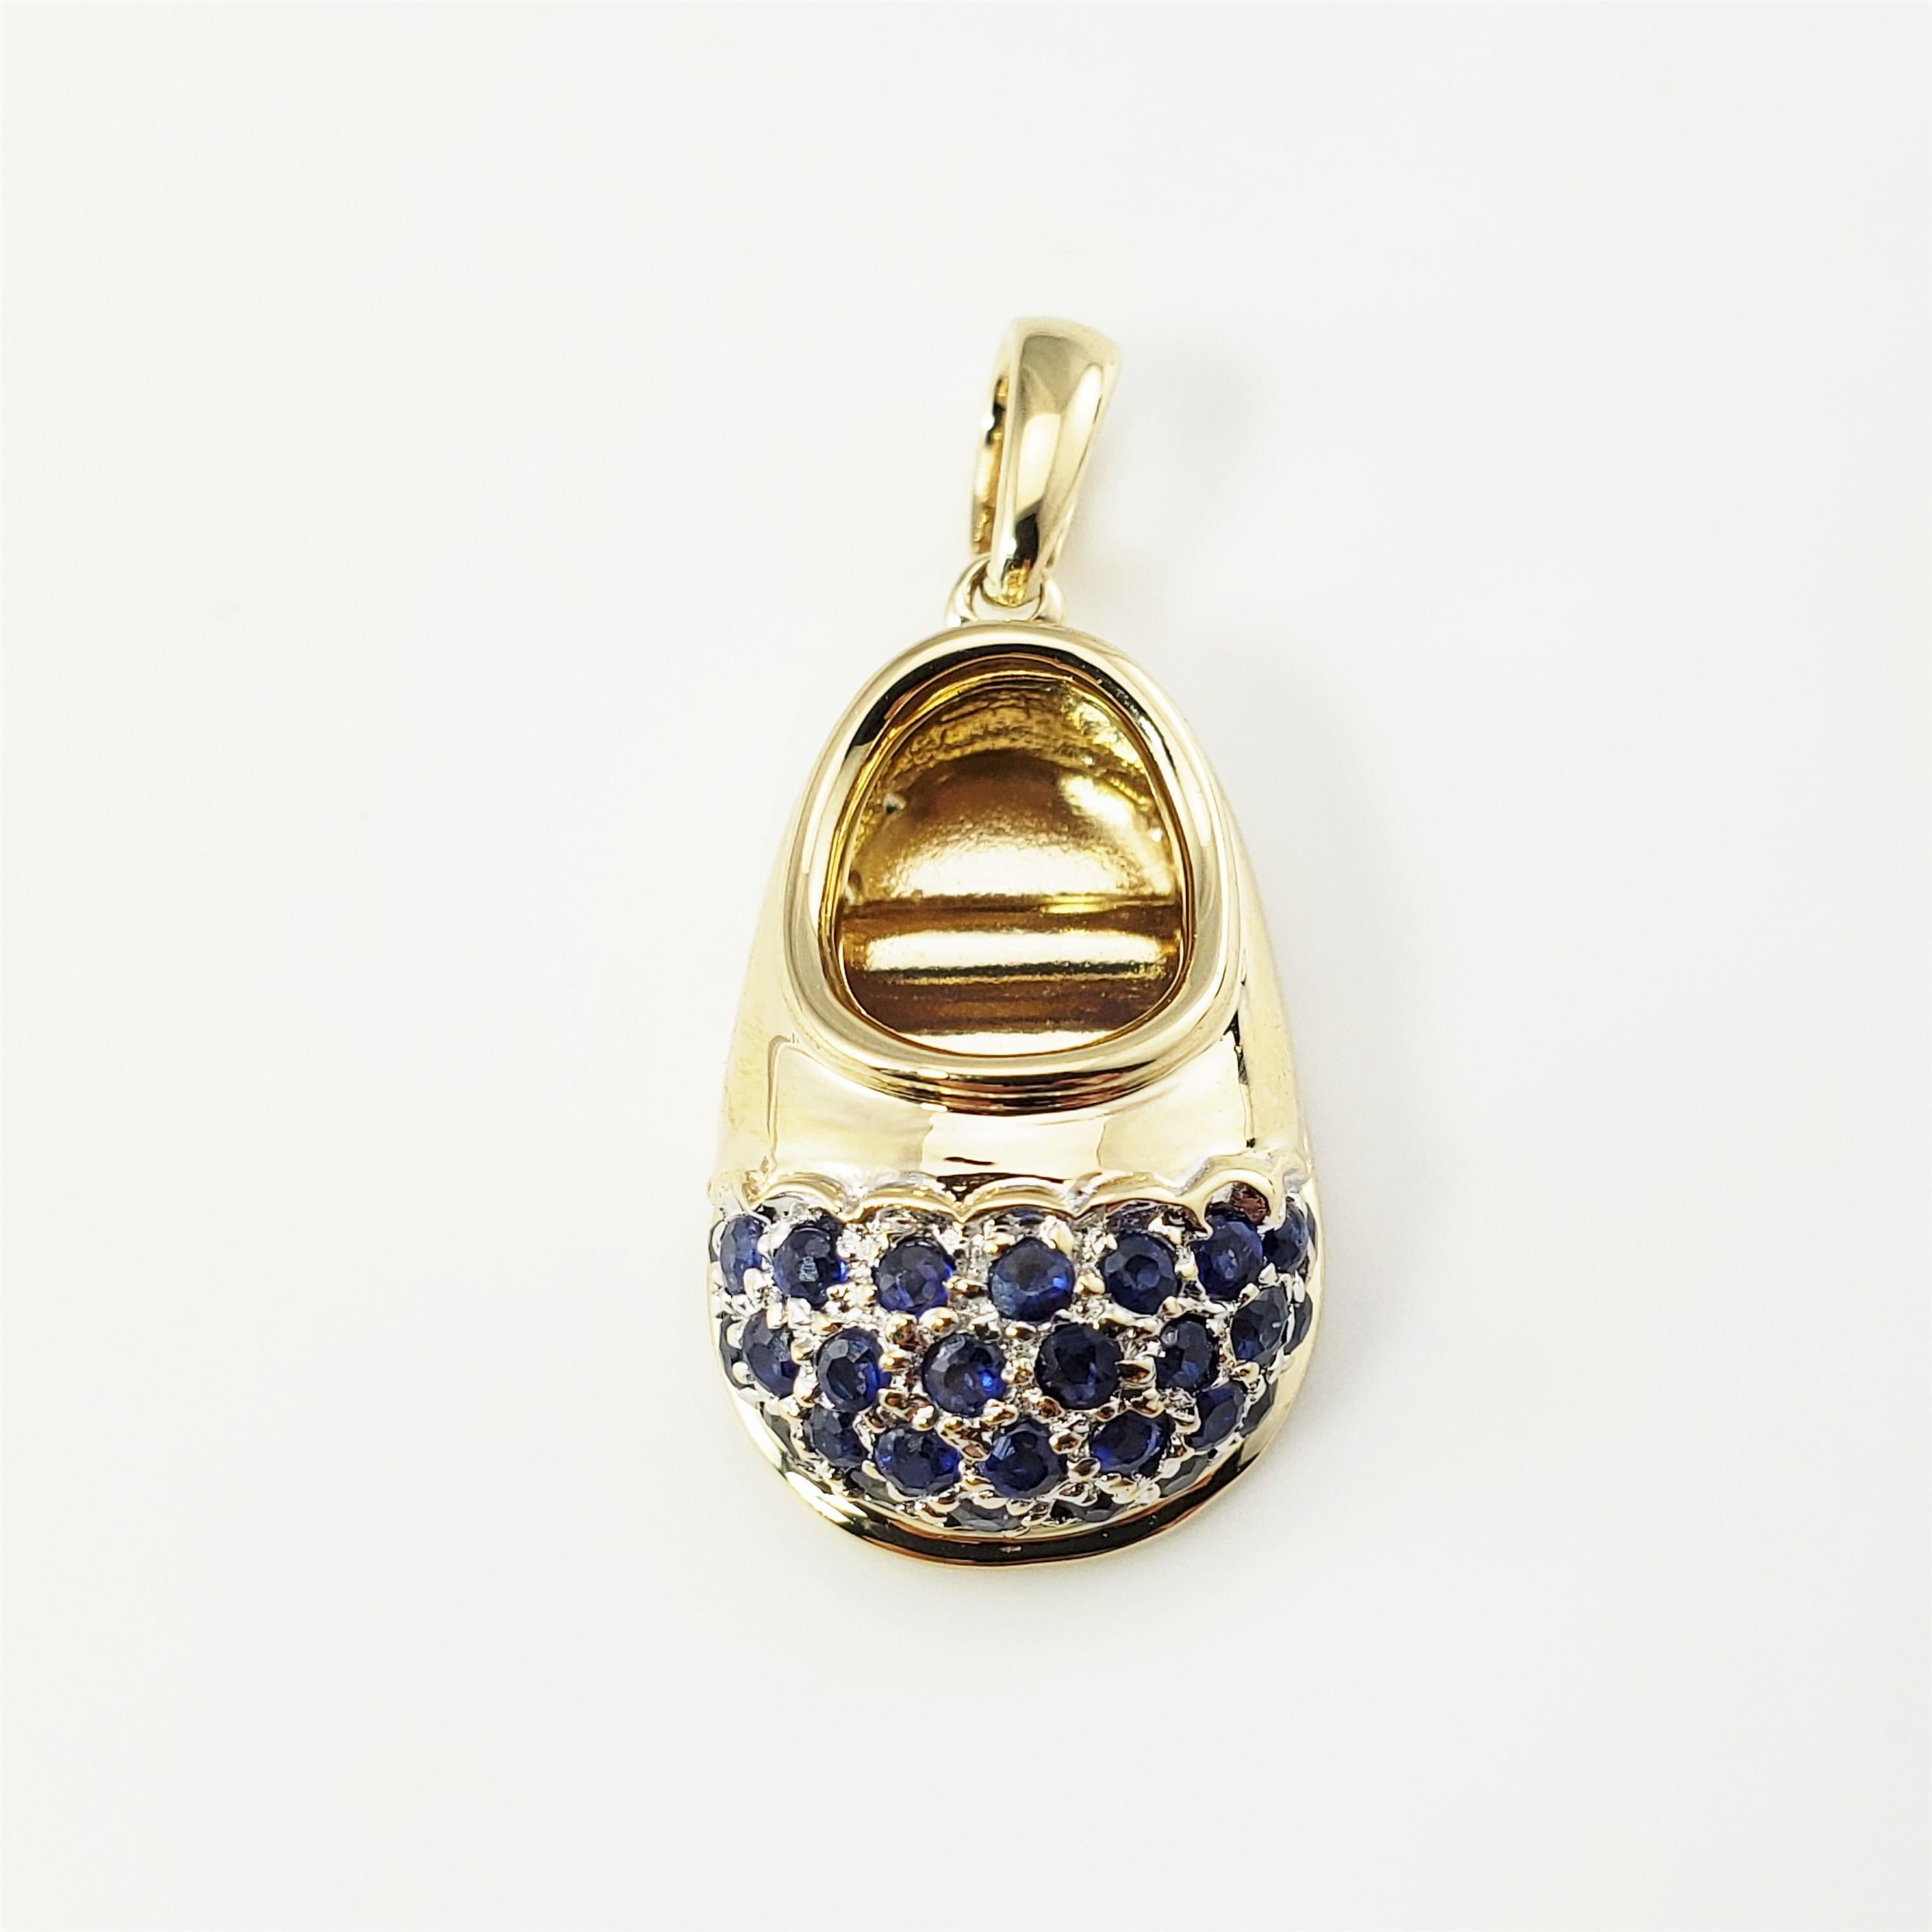 Vintage 14 Karat Yellow Gold and Sapphire Baby Shoe Charm-

This lovely 3D charm features a beautifully detailed baby shoe accented with 28 blue sapphires.  Crafted in classic 14K yellow gold.

Size:  19 mm x  11 mm (actual charm)

Weight:  2.2 dwt.